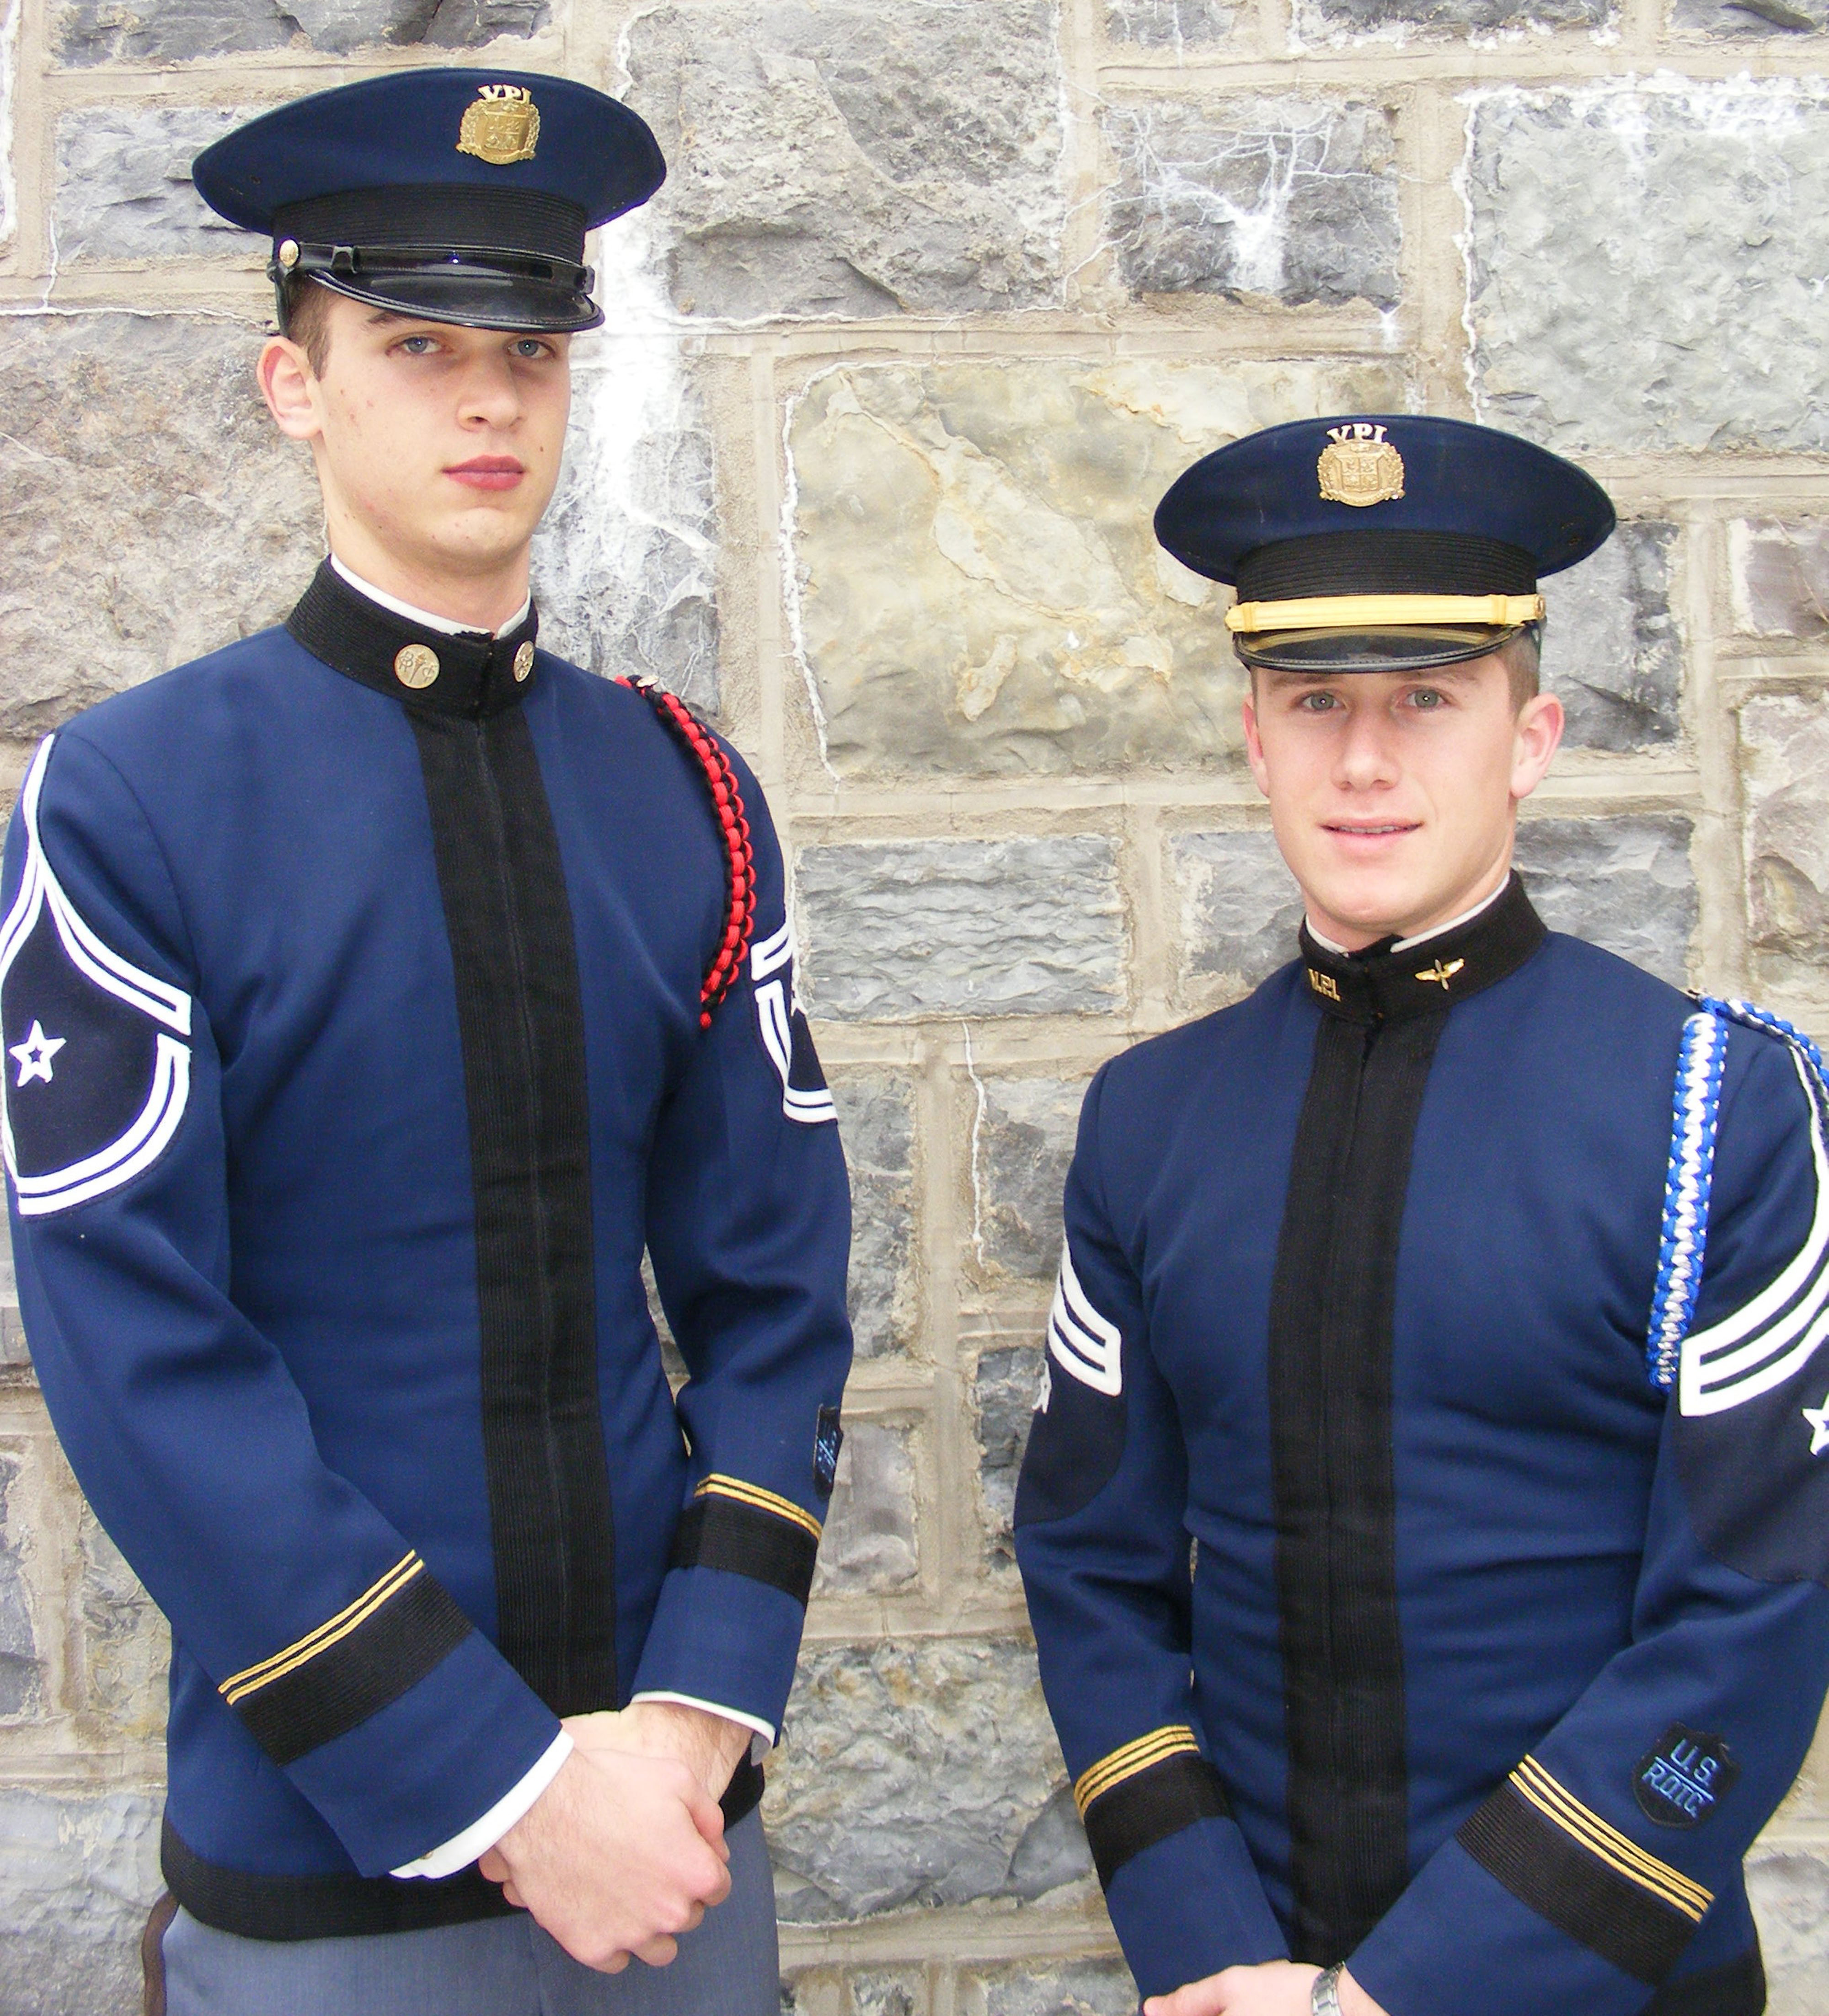 From left to right are Cadets Justin Hunts and Scott Saville